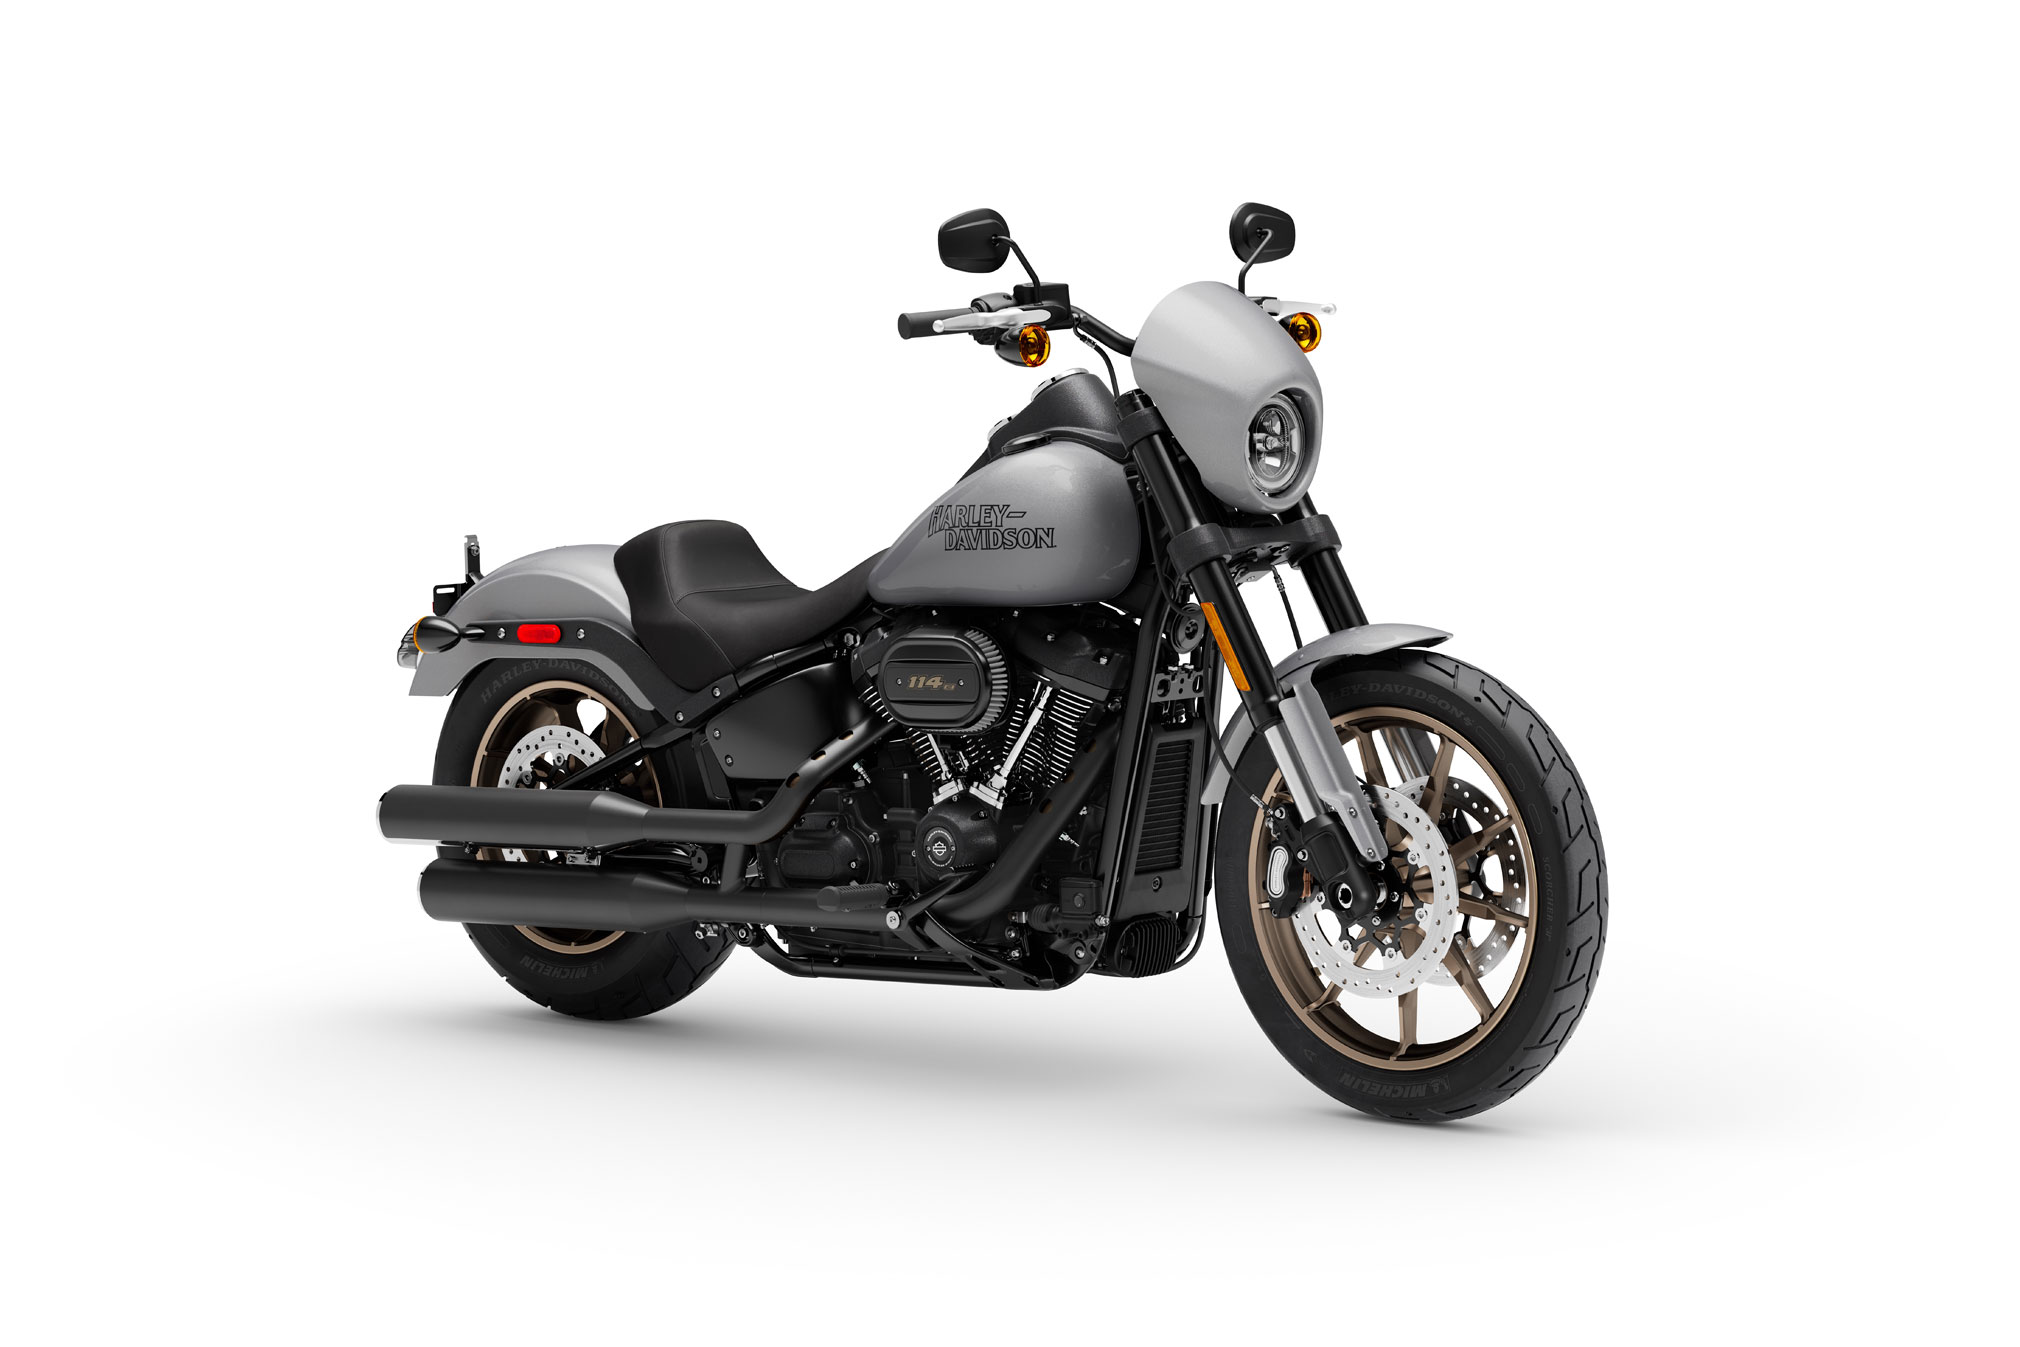 2020 Harley Davidson Low Rider S Guide Total Motorcycle